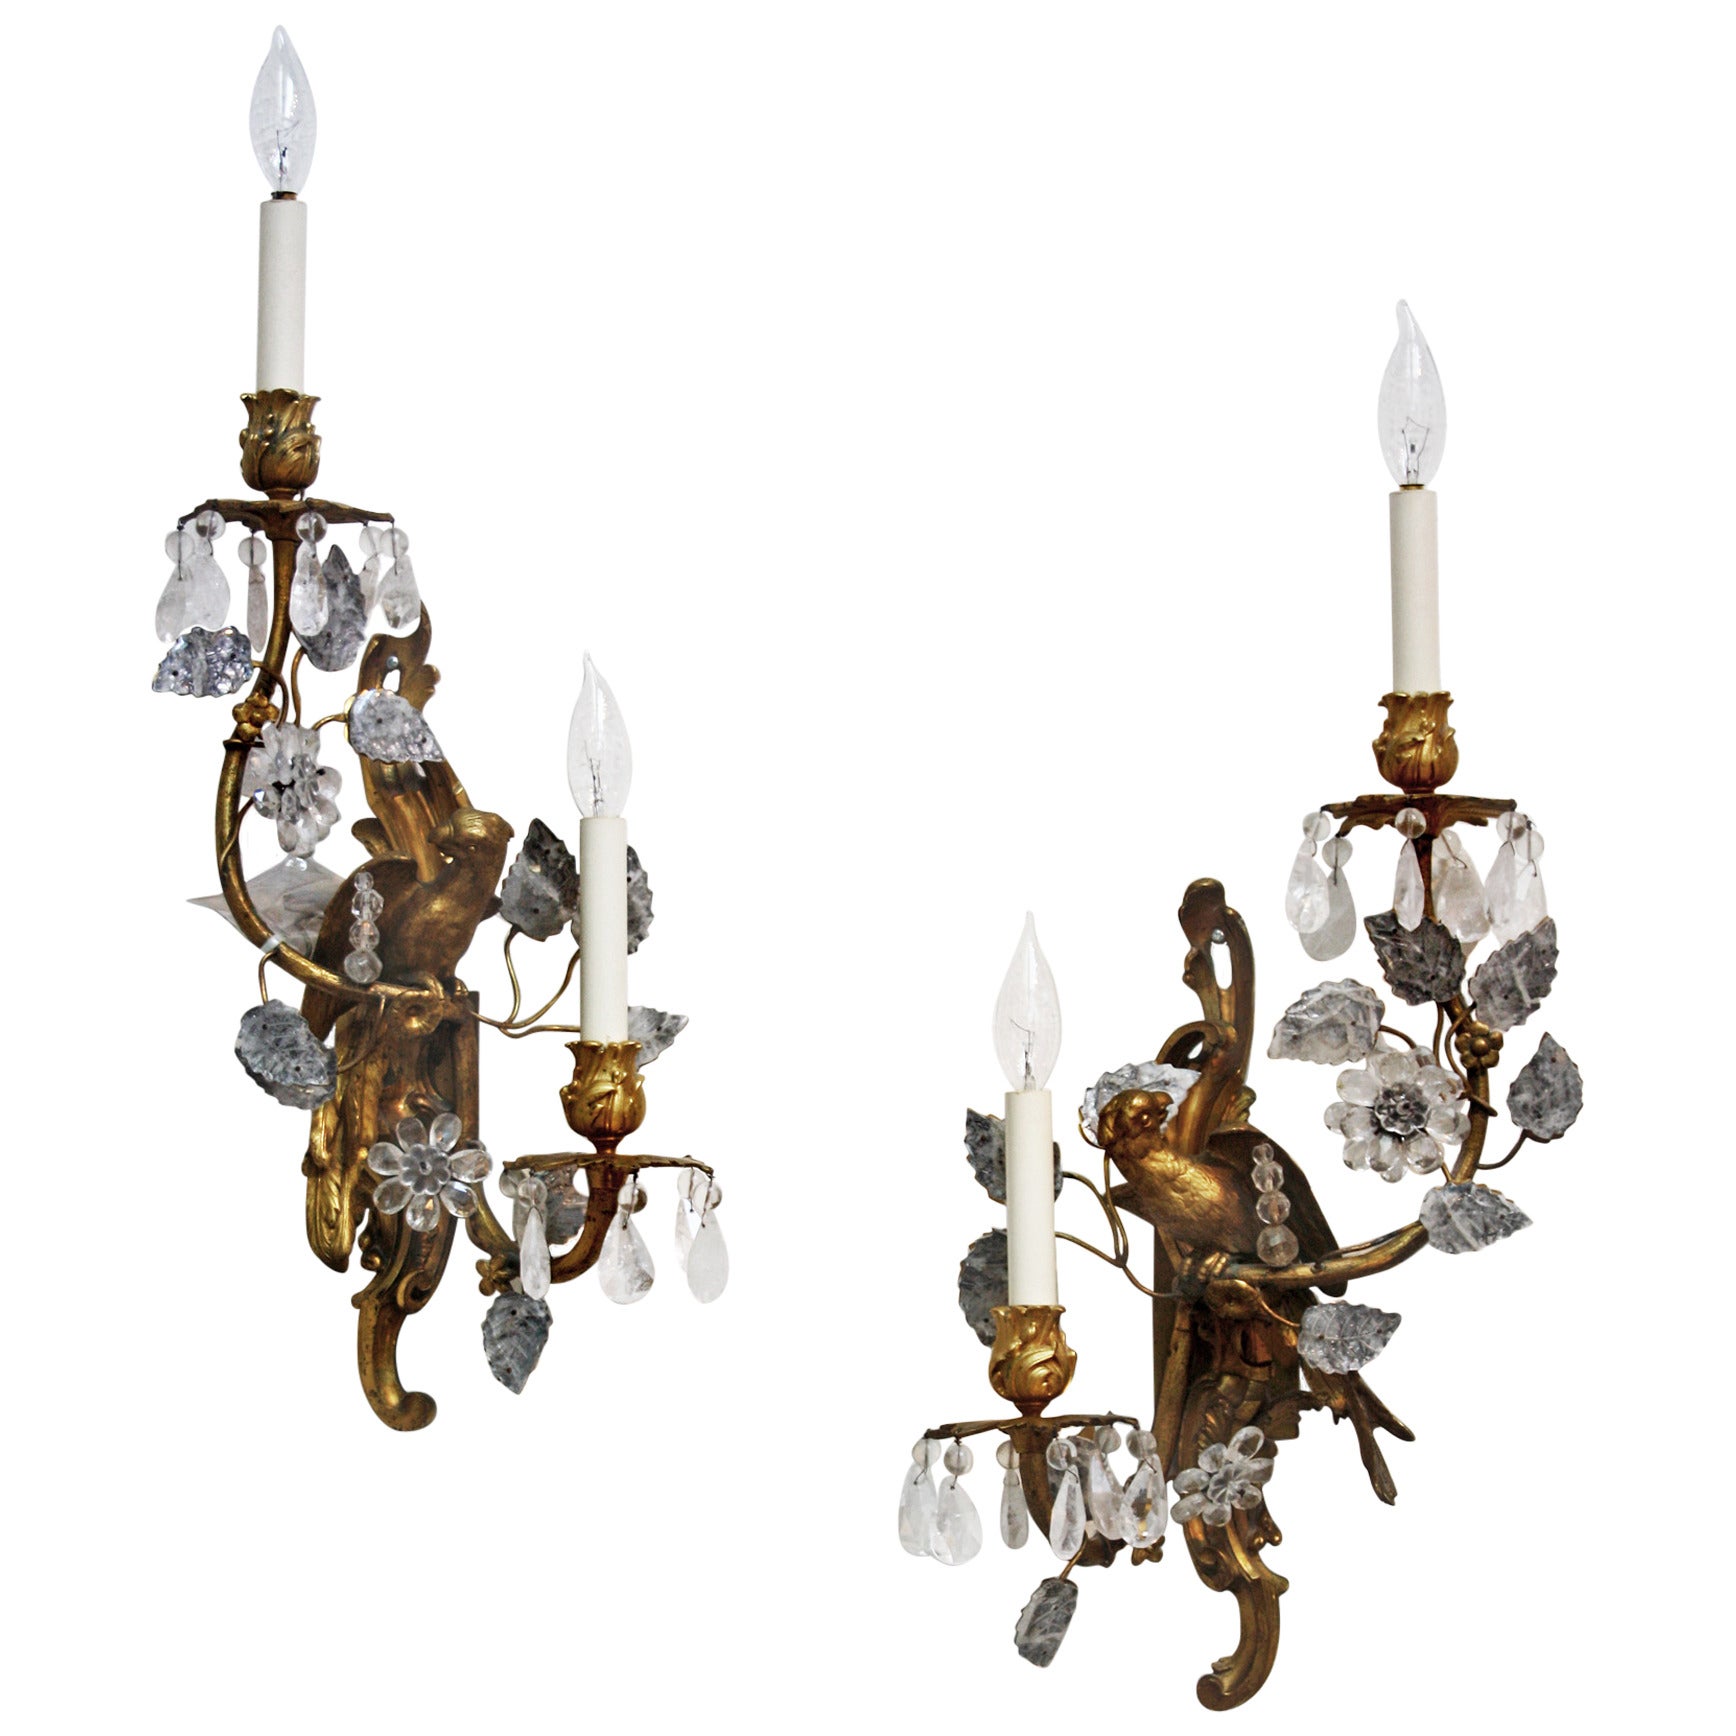 Pair of Maison Baguès Gilt Bronze and Rock Crystal Sconces with Parrots